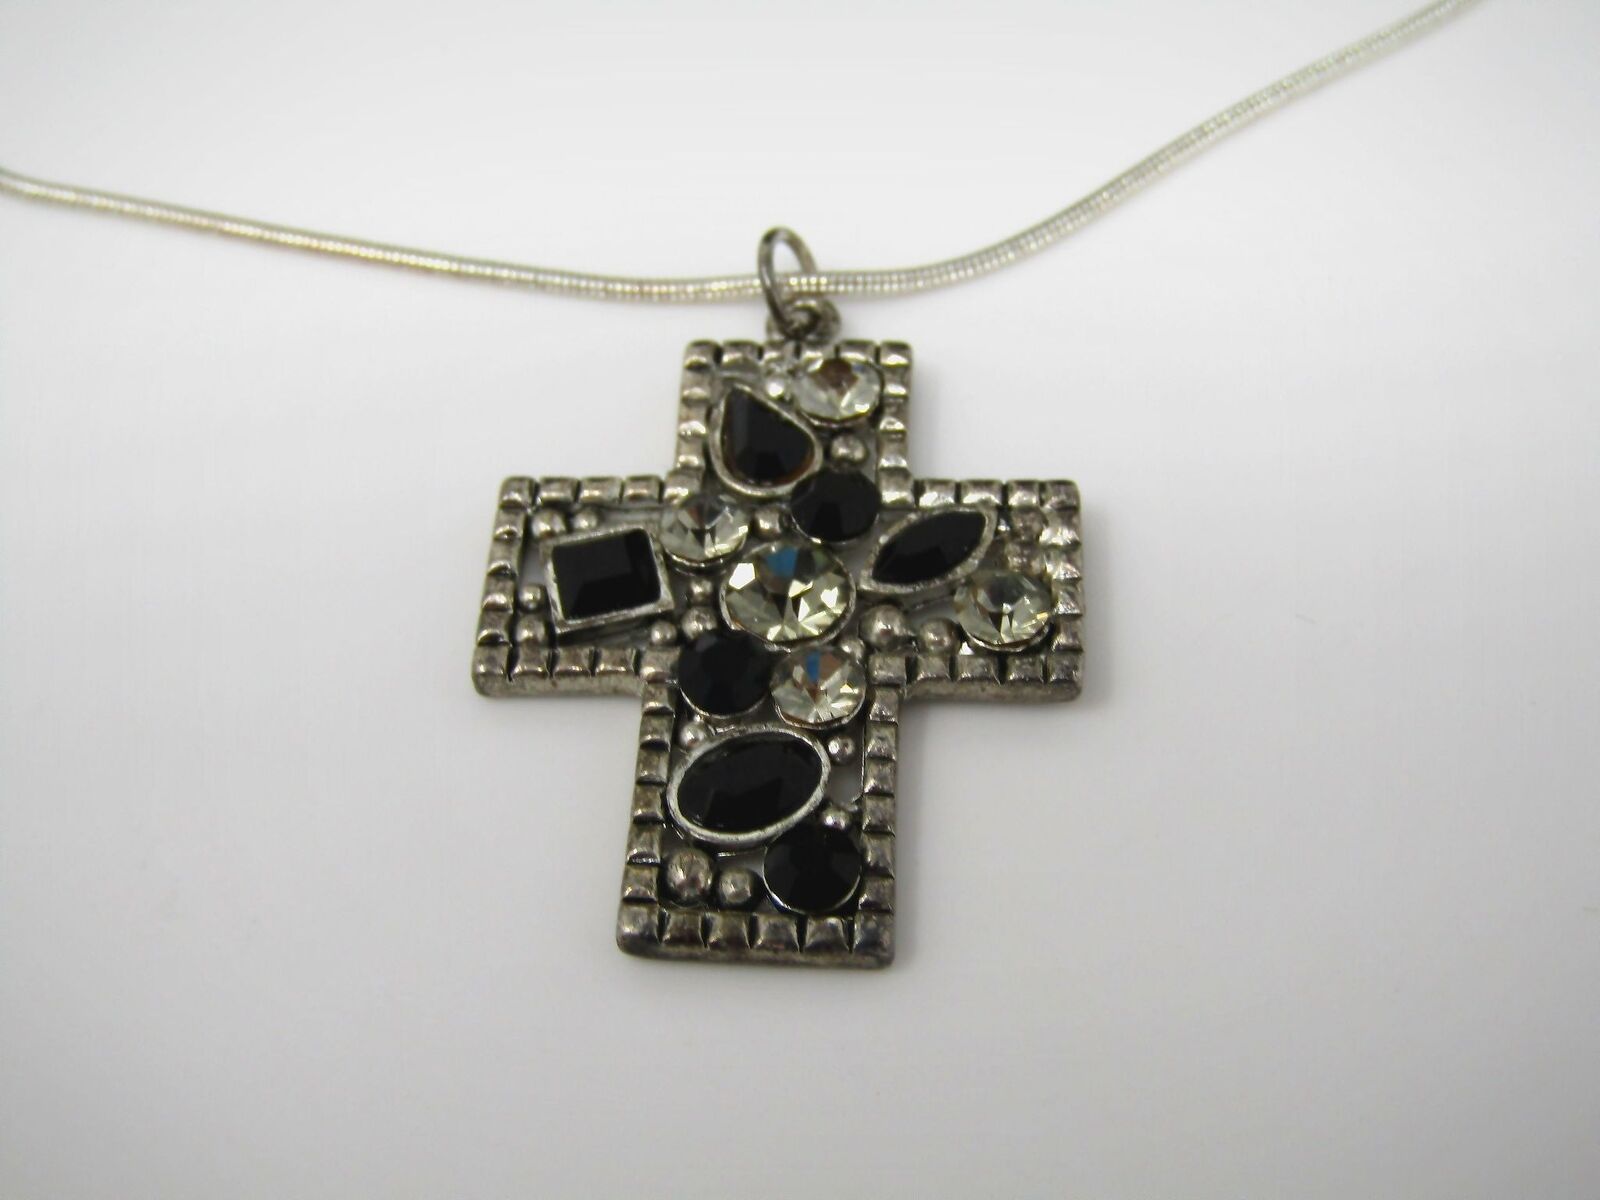 Vintage Christian Necklace Jewelry: Black Accents Clear Jewels